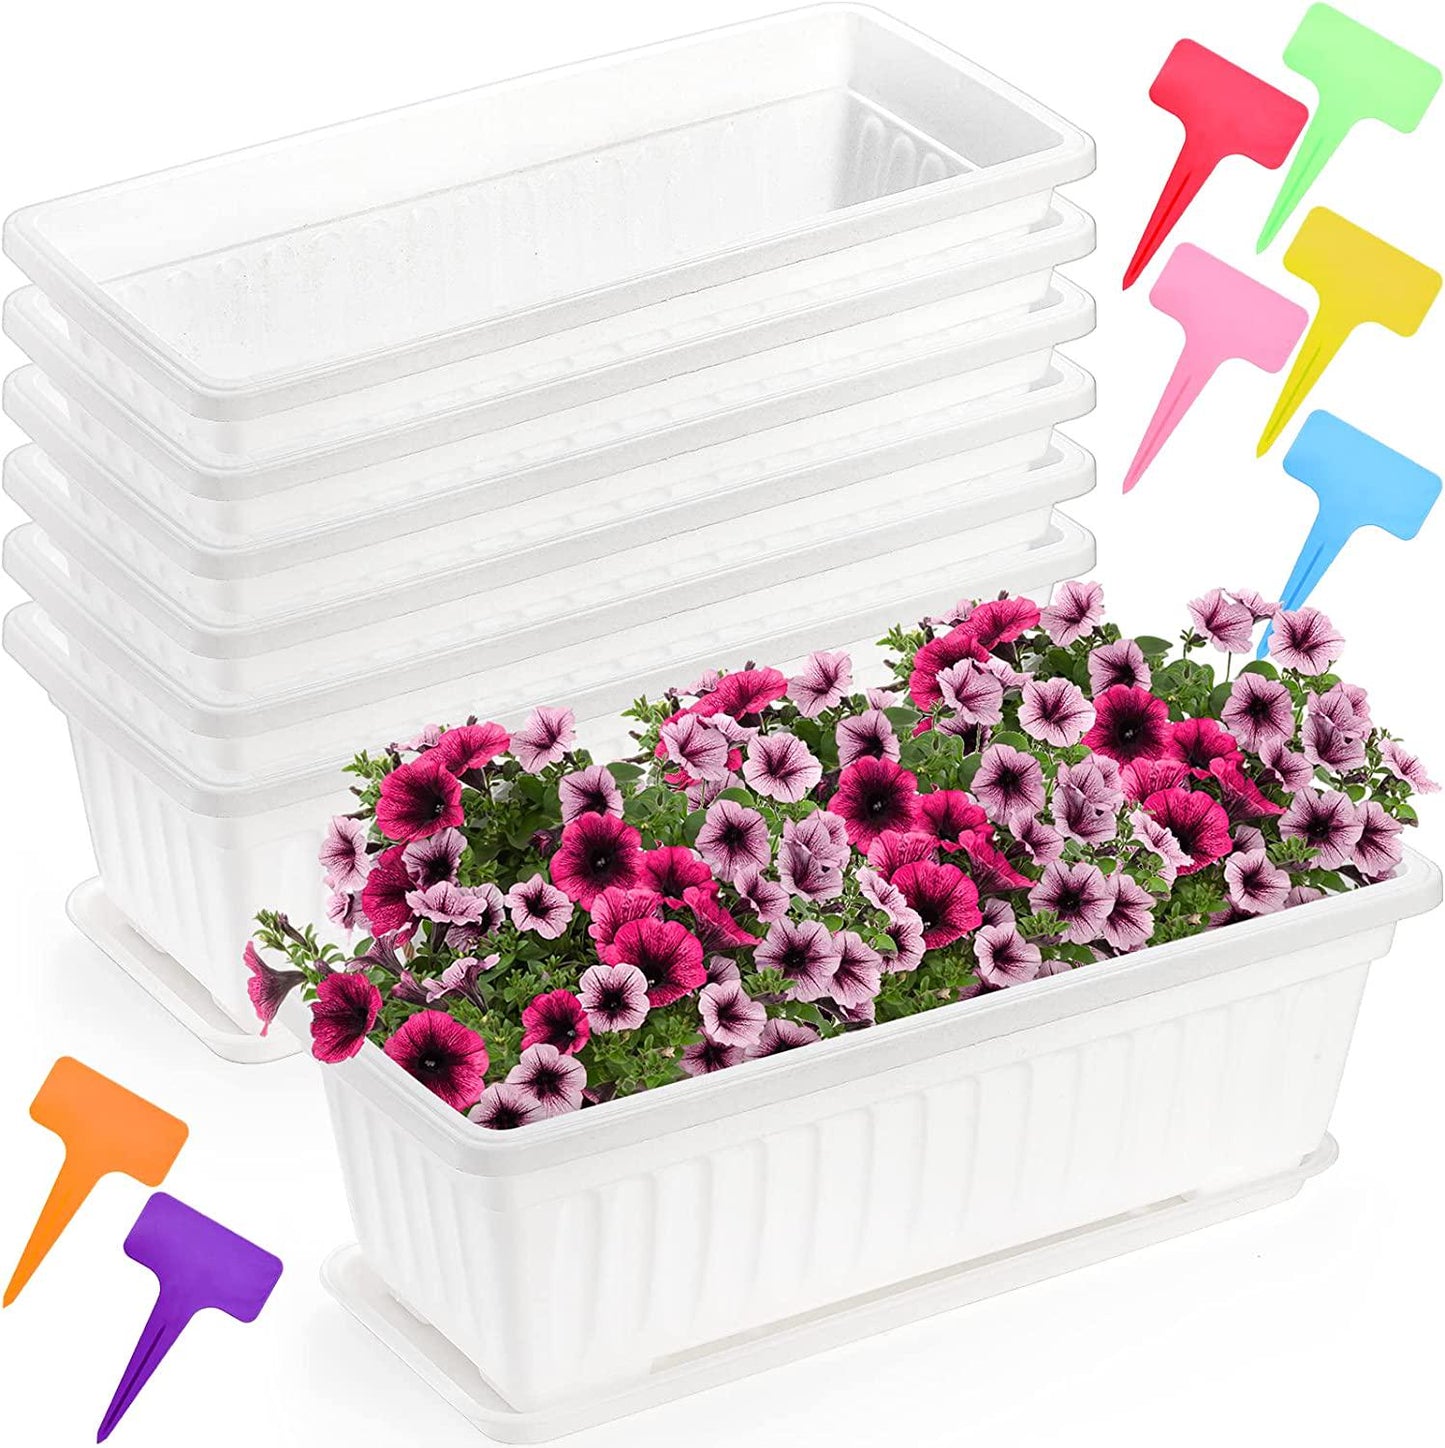 Fasmov 7 Pack 17 Inches White Flower Window Box Plastic Vegetable Planters with Trays Vegetables Growing Container Garden Flower Plant Pot for Balcony, Window Sill, Patio, Garden, White-